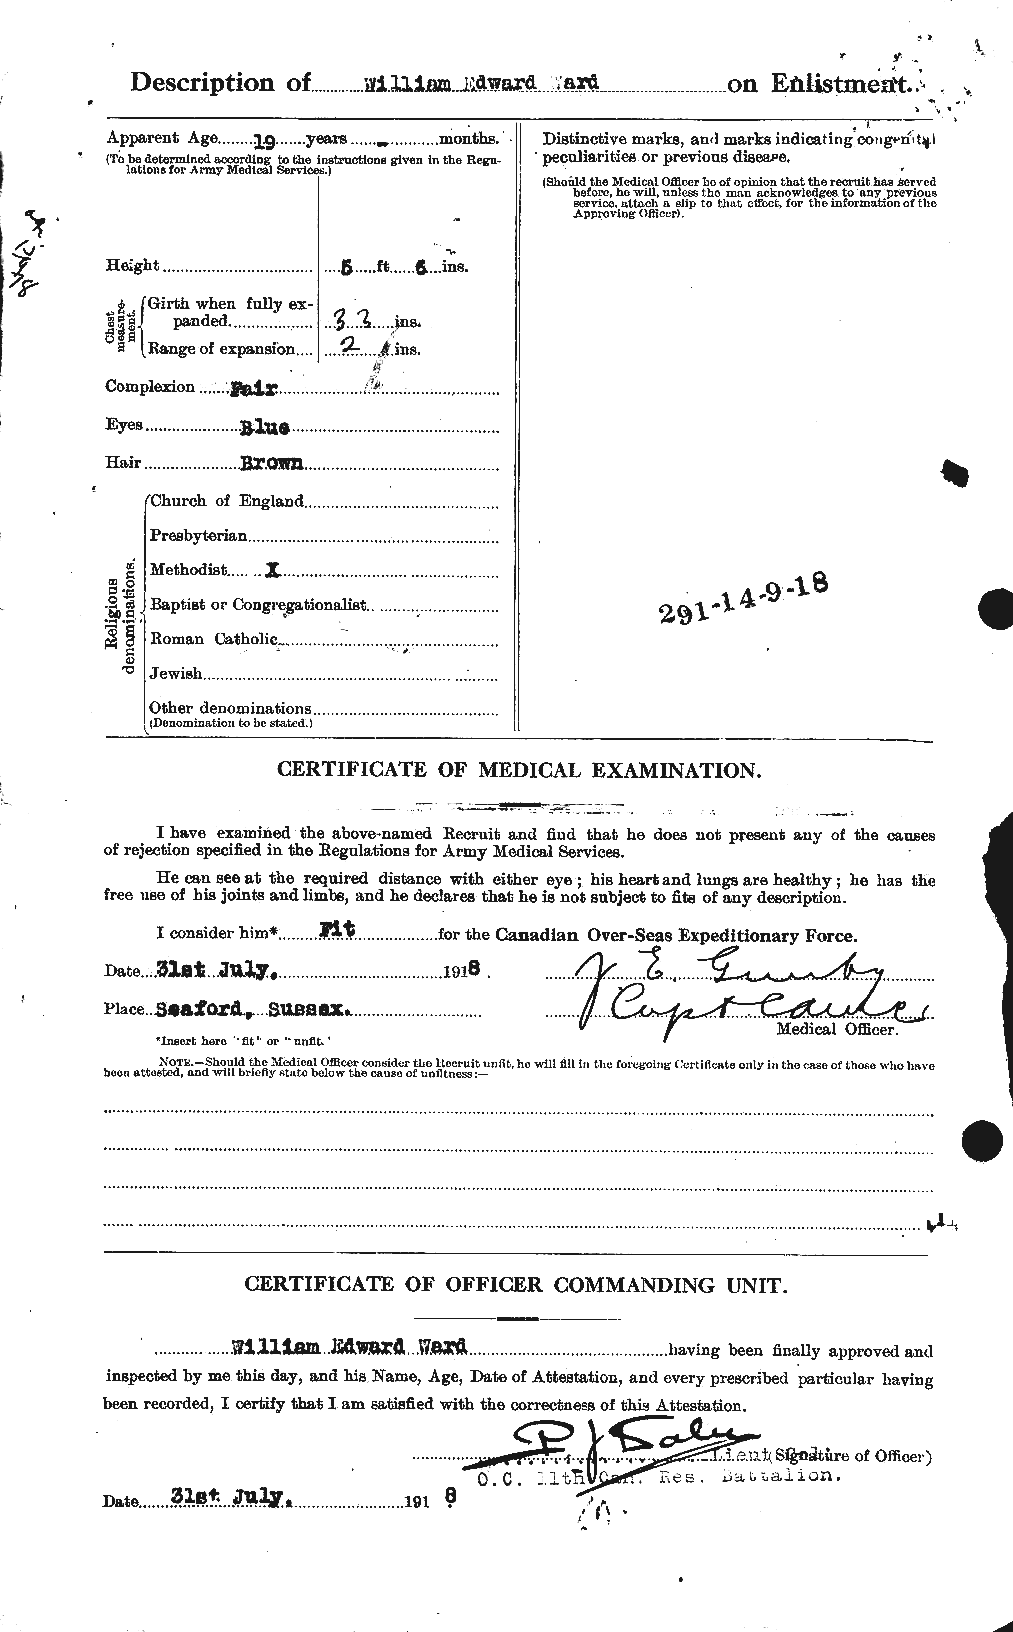 Personnel Records of the First World War - CEF 659810b